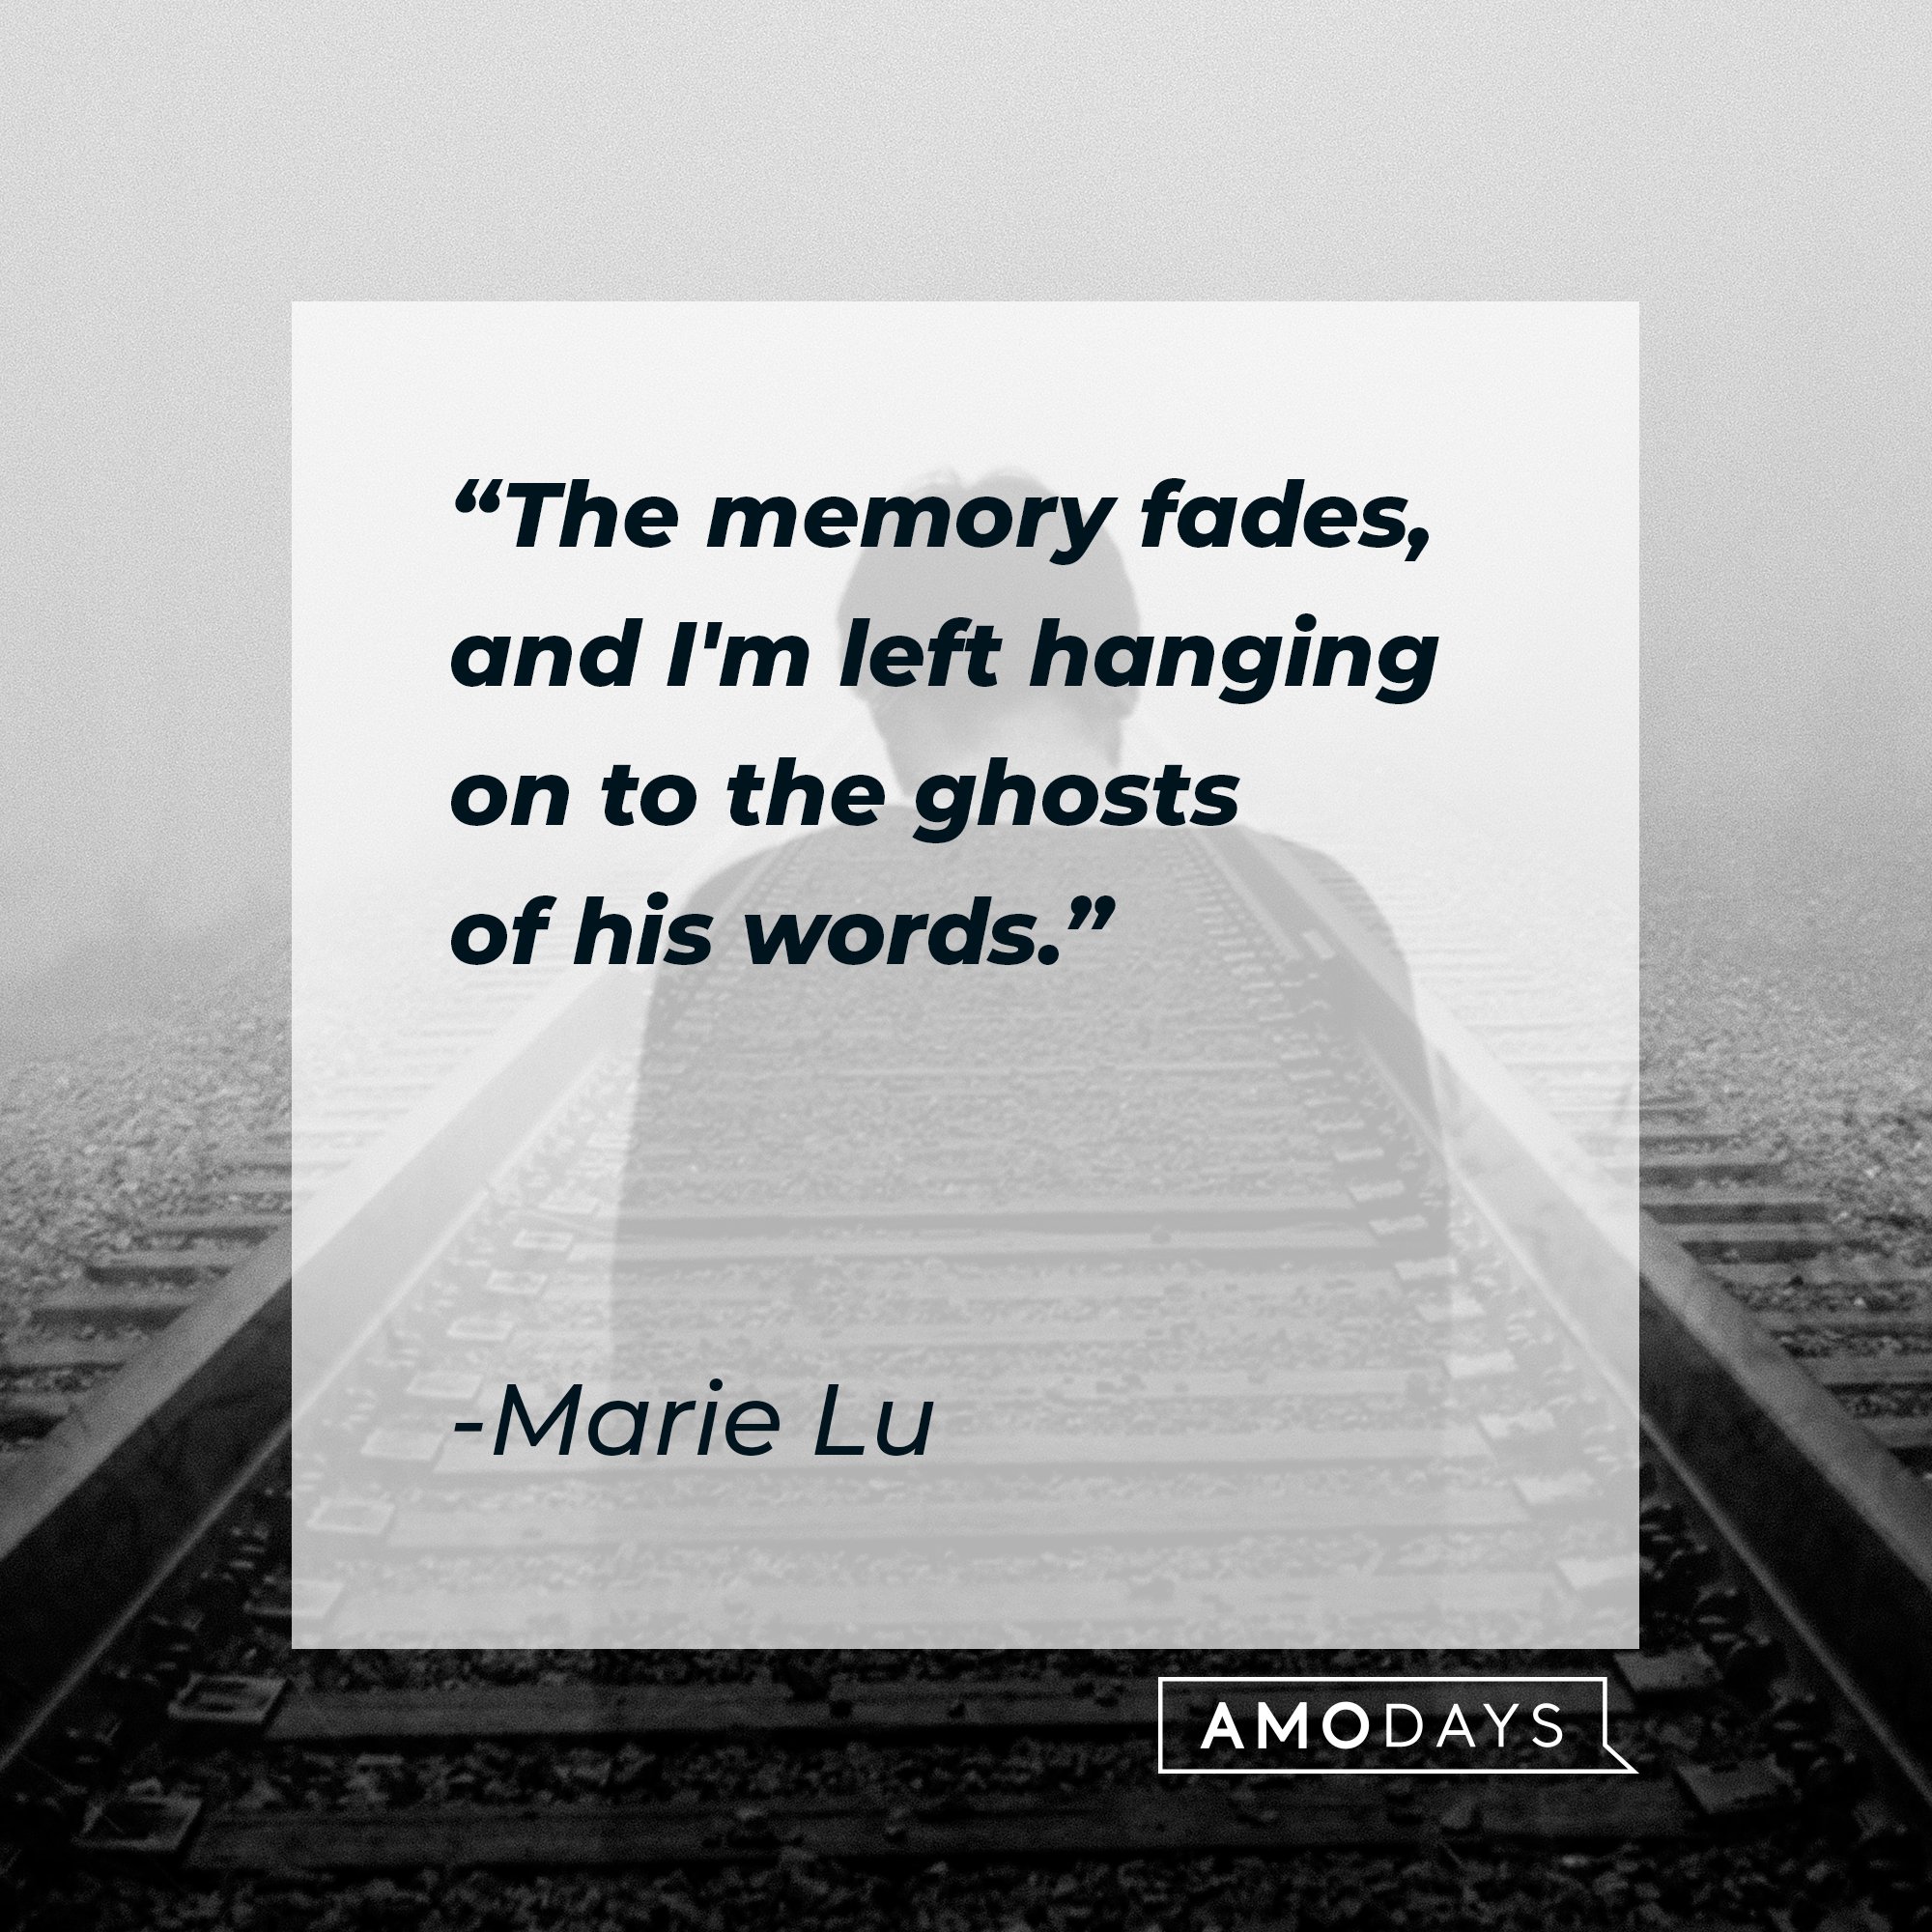 Marie Lu’s quote: "The memory fades, and I'm left hanging on to the ghosts of his words." | Image: AmoDays 